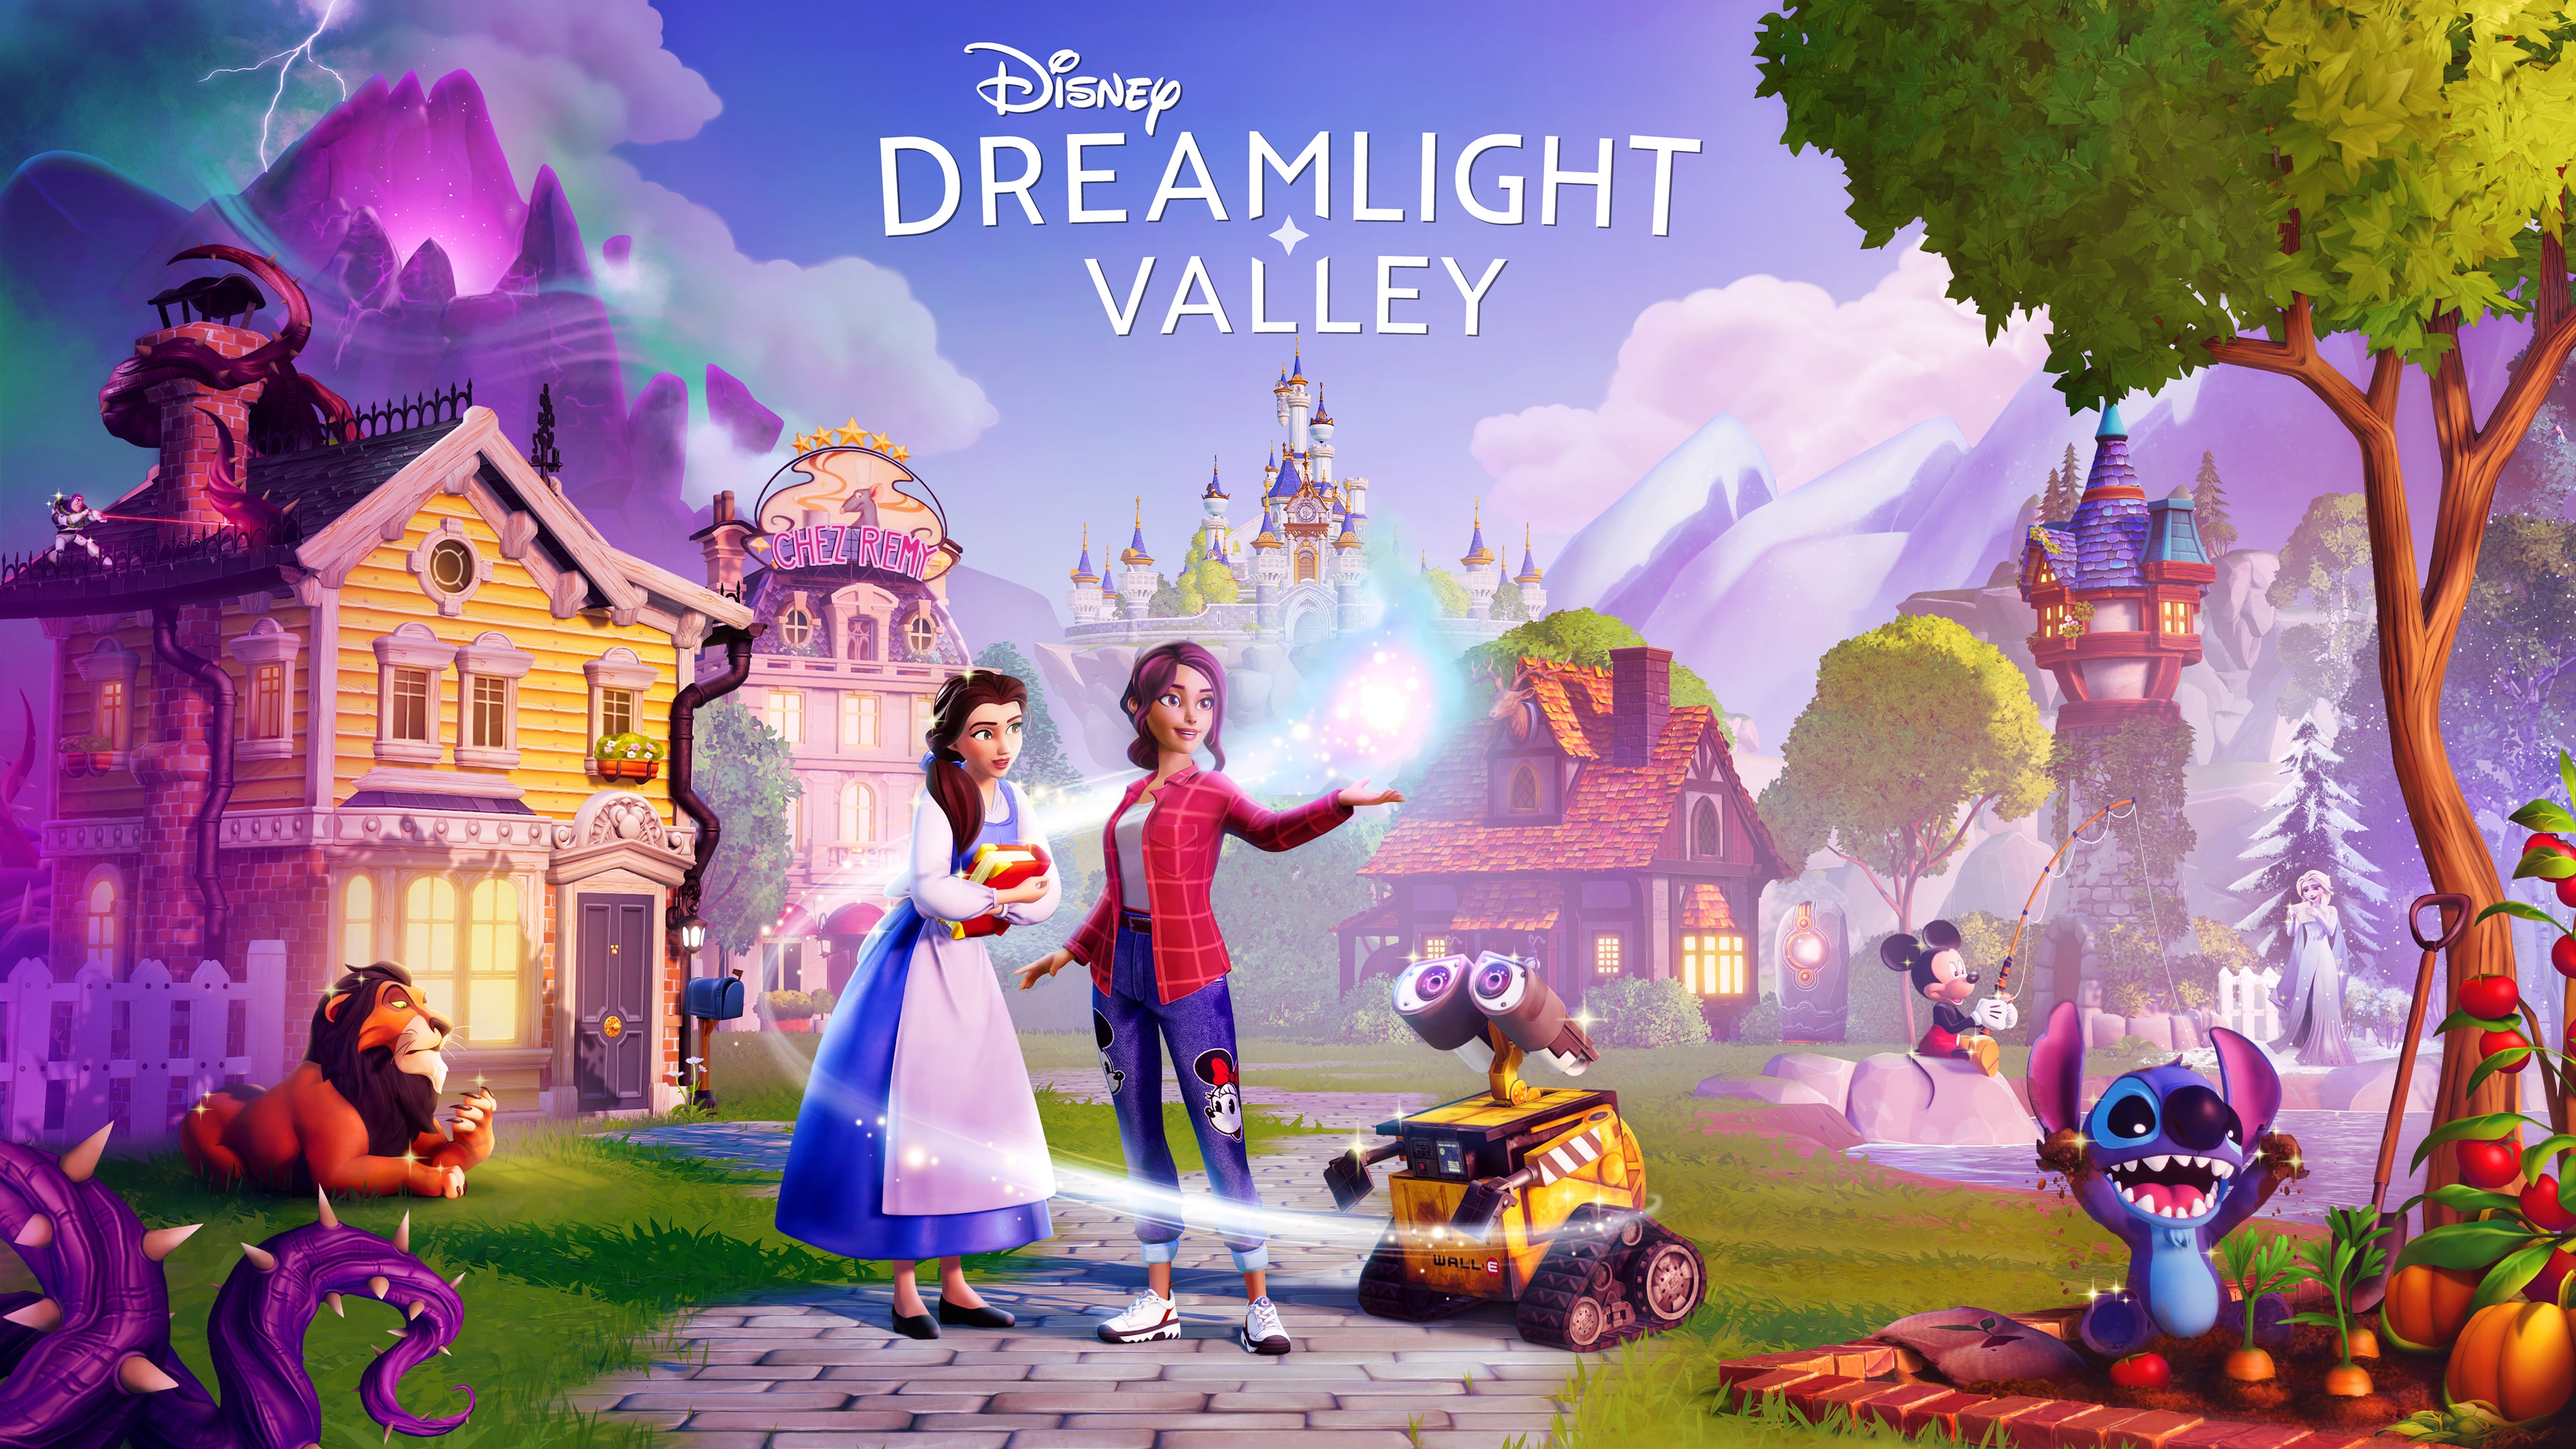 Disney Dreamlight Valley (Simplified Chinese, English, Japanese)